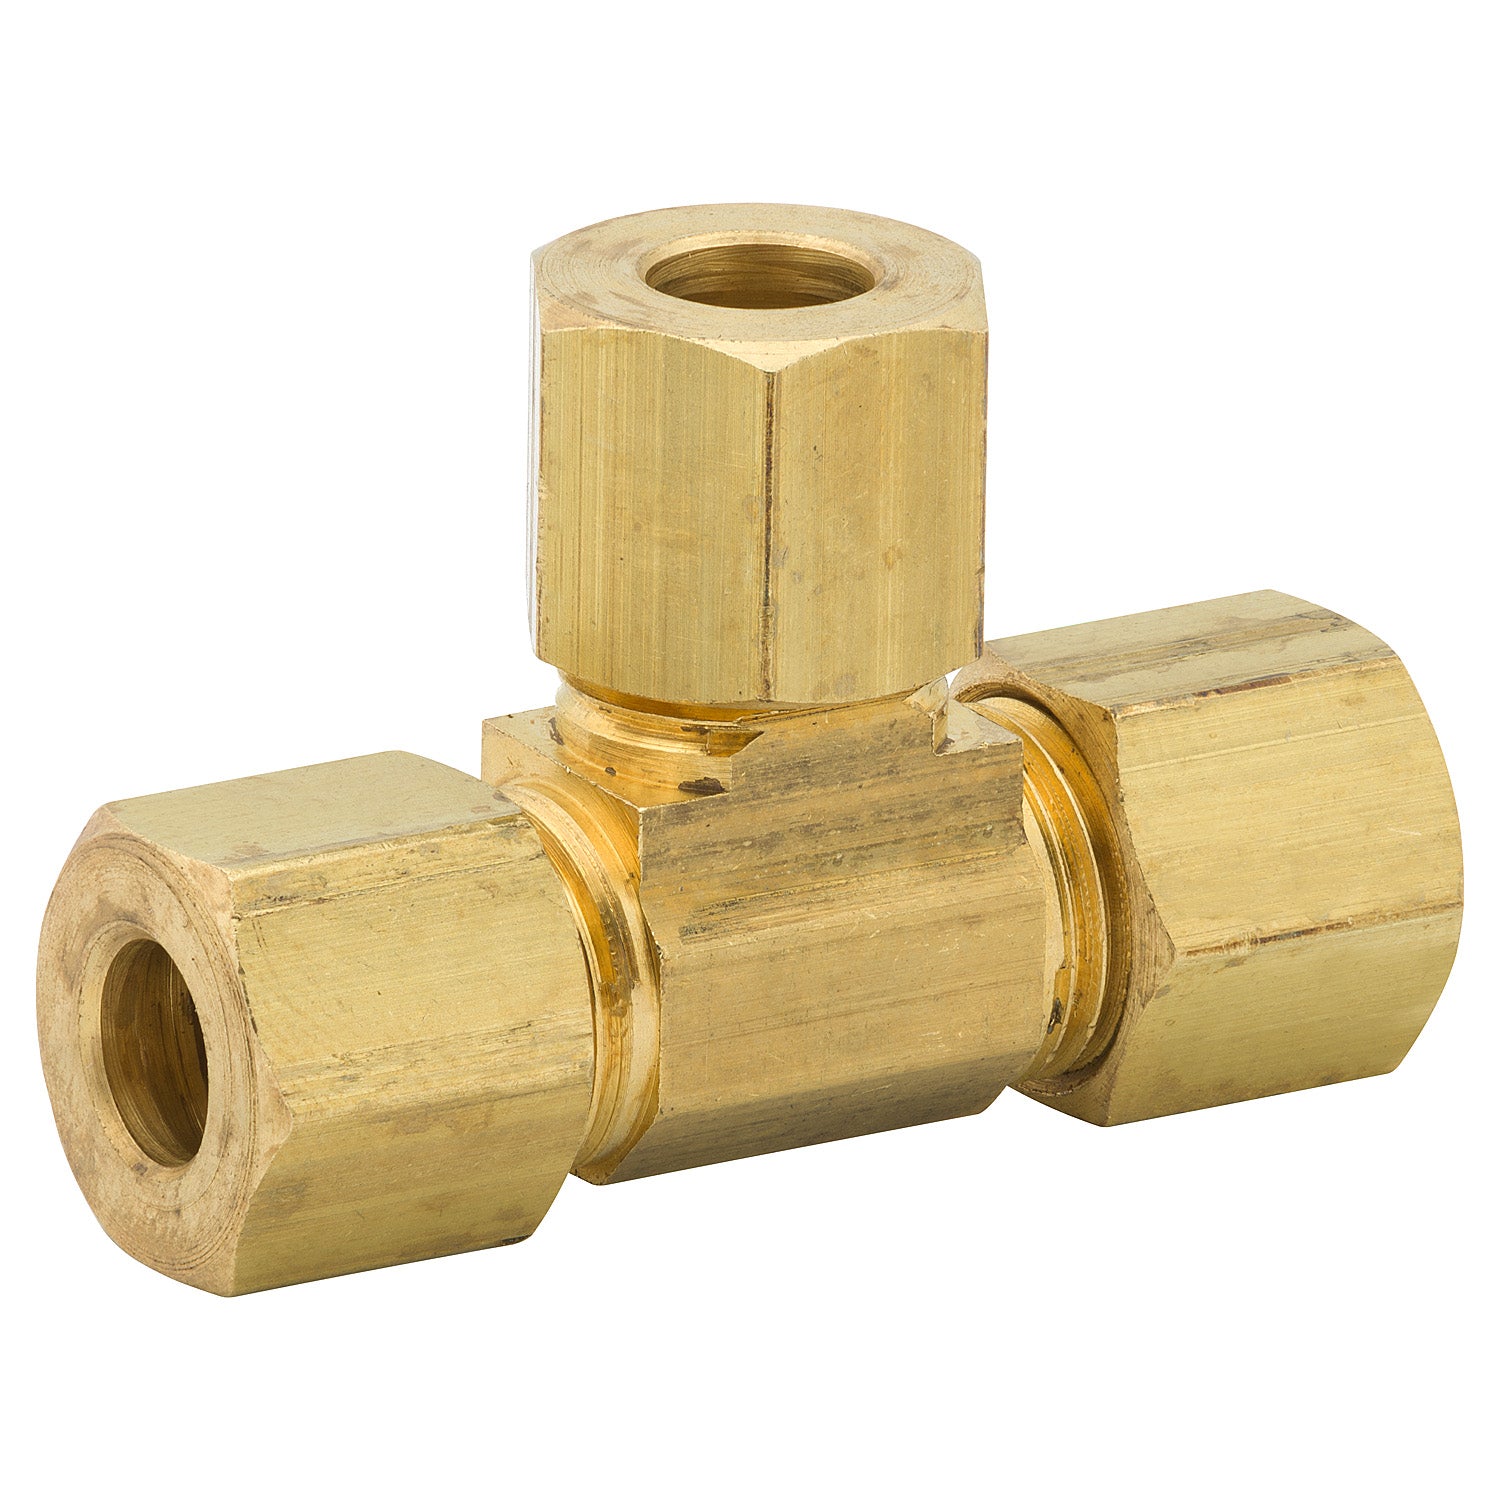 Union Tee Compression, Brass, 1/4, Bag of 1